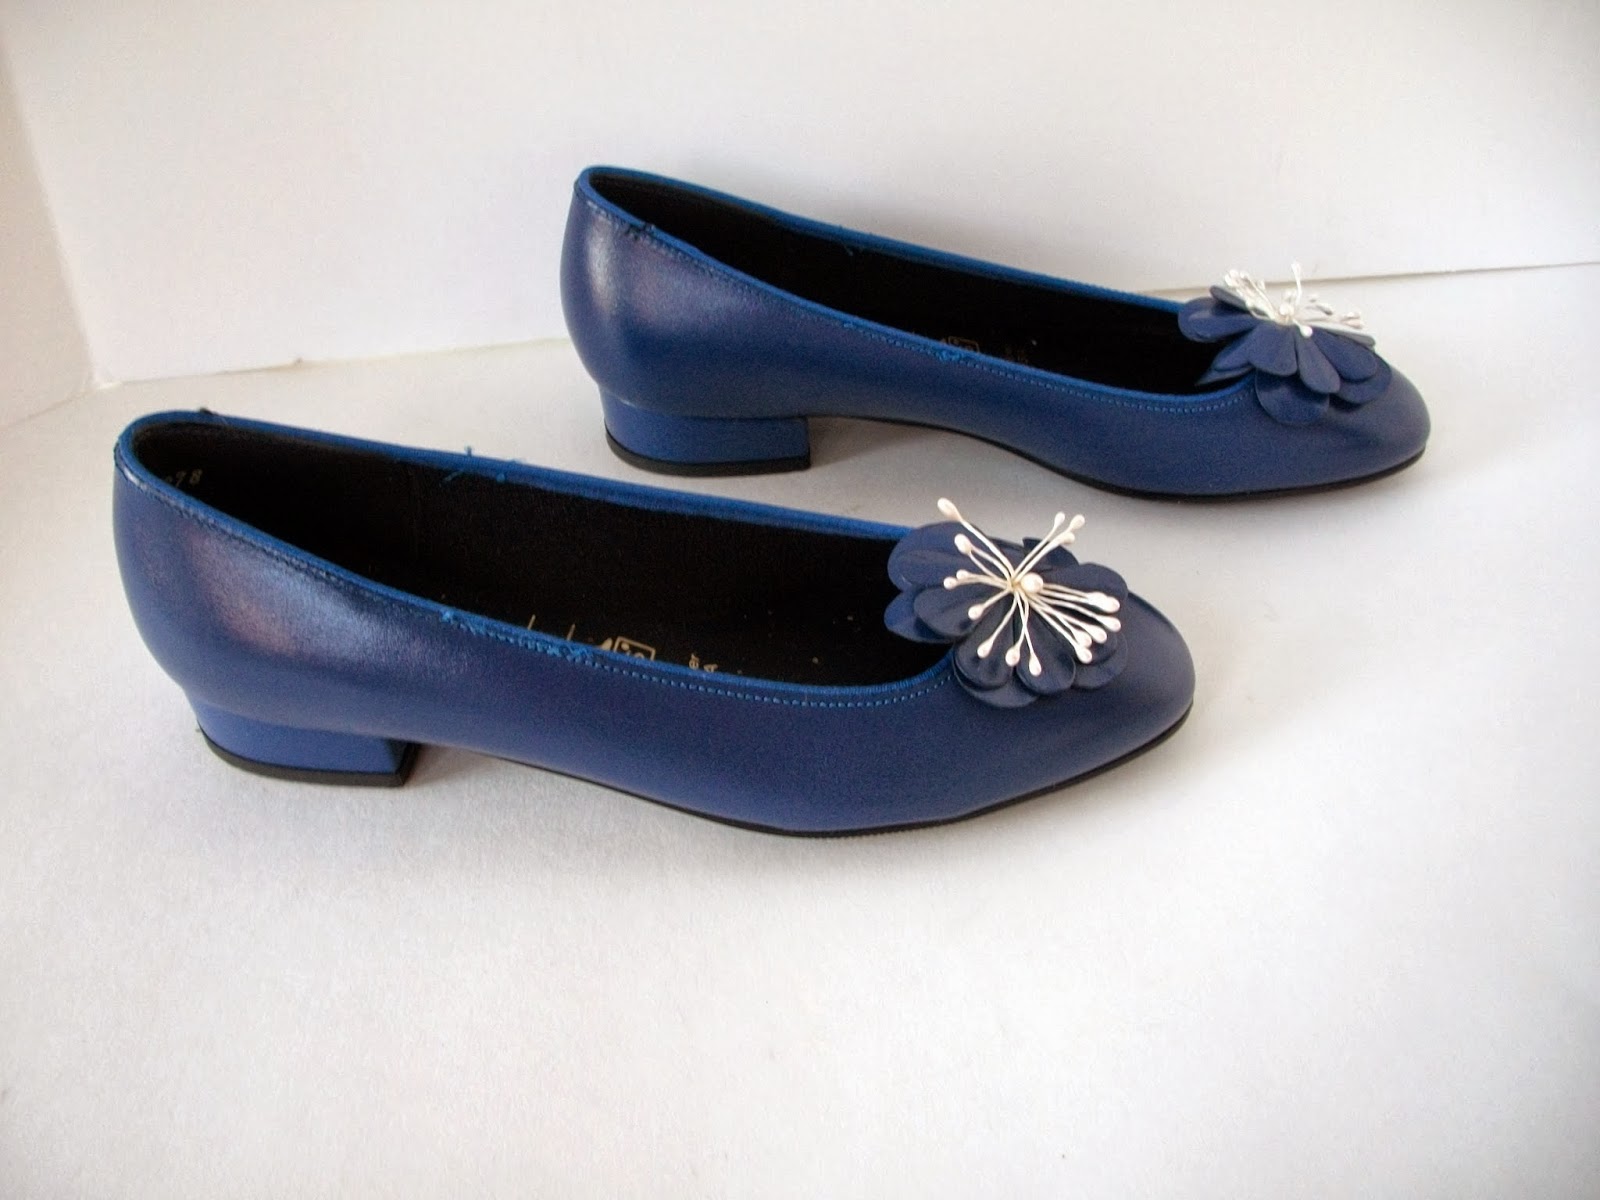 Still Stunning Vintage Resale: Tic-Tac-Toes Periwinkle Blue Leather ...